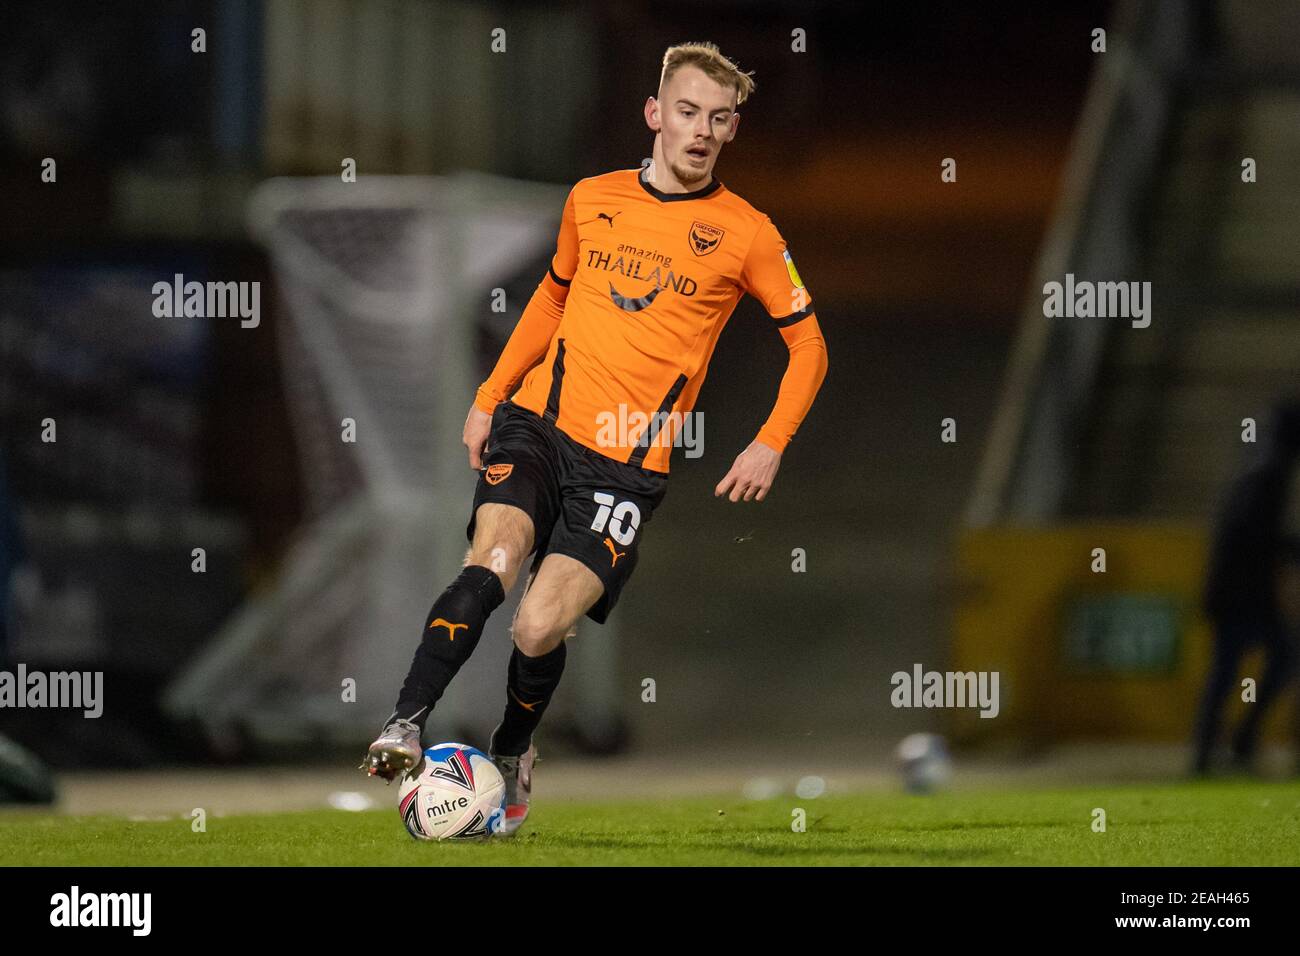 Bristol, UK. 09th Feb, 2021. Mark Sykes #10 of Oxford United in Bristol, UK on 2/9/2021. (Photo by Gareth Dalley/News Images/Sipa USA) Credit: Sipa USA/Alamy Live News Stock Photo